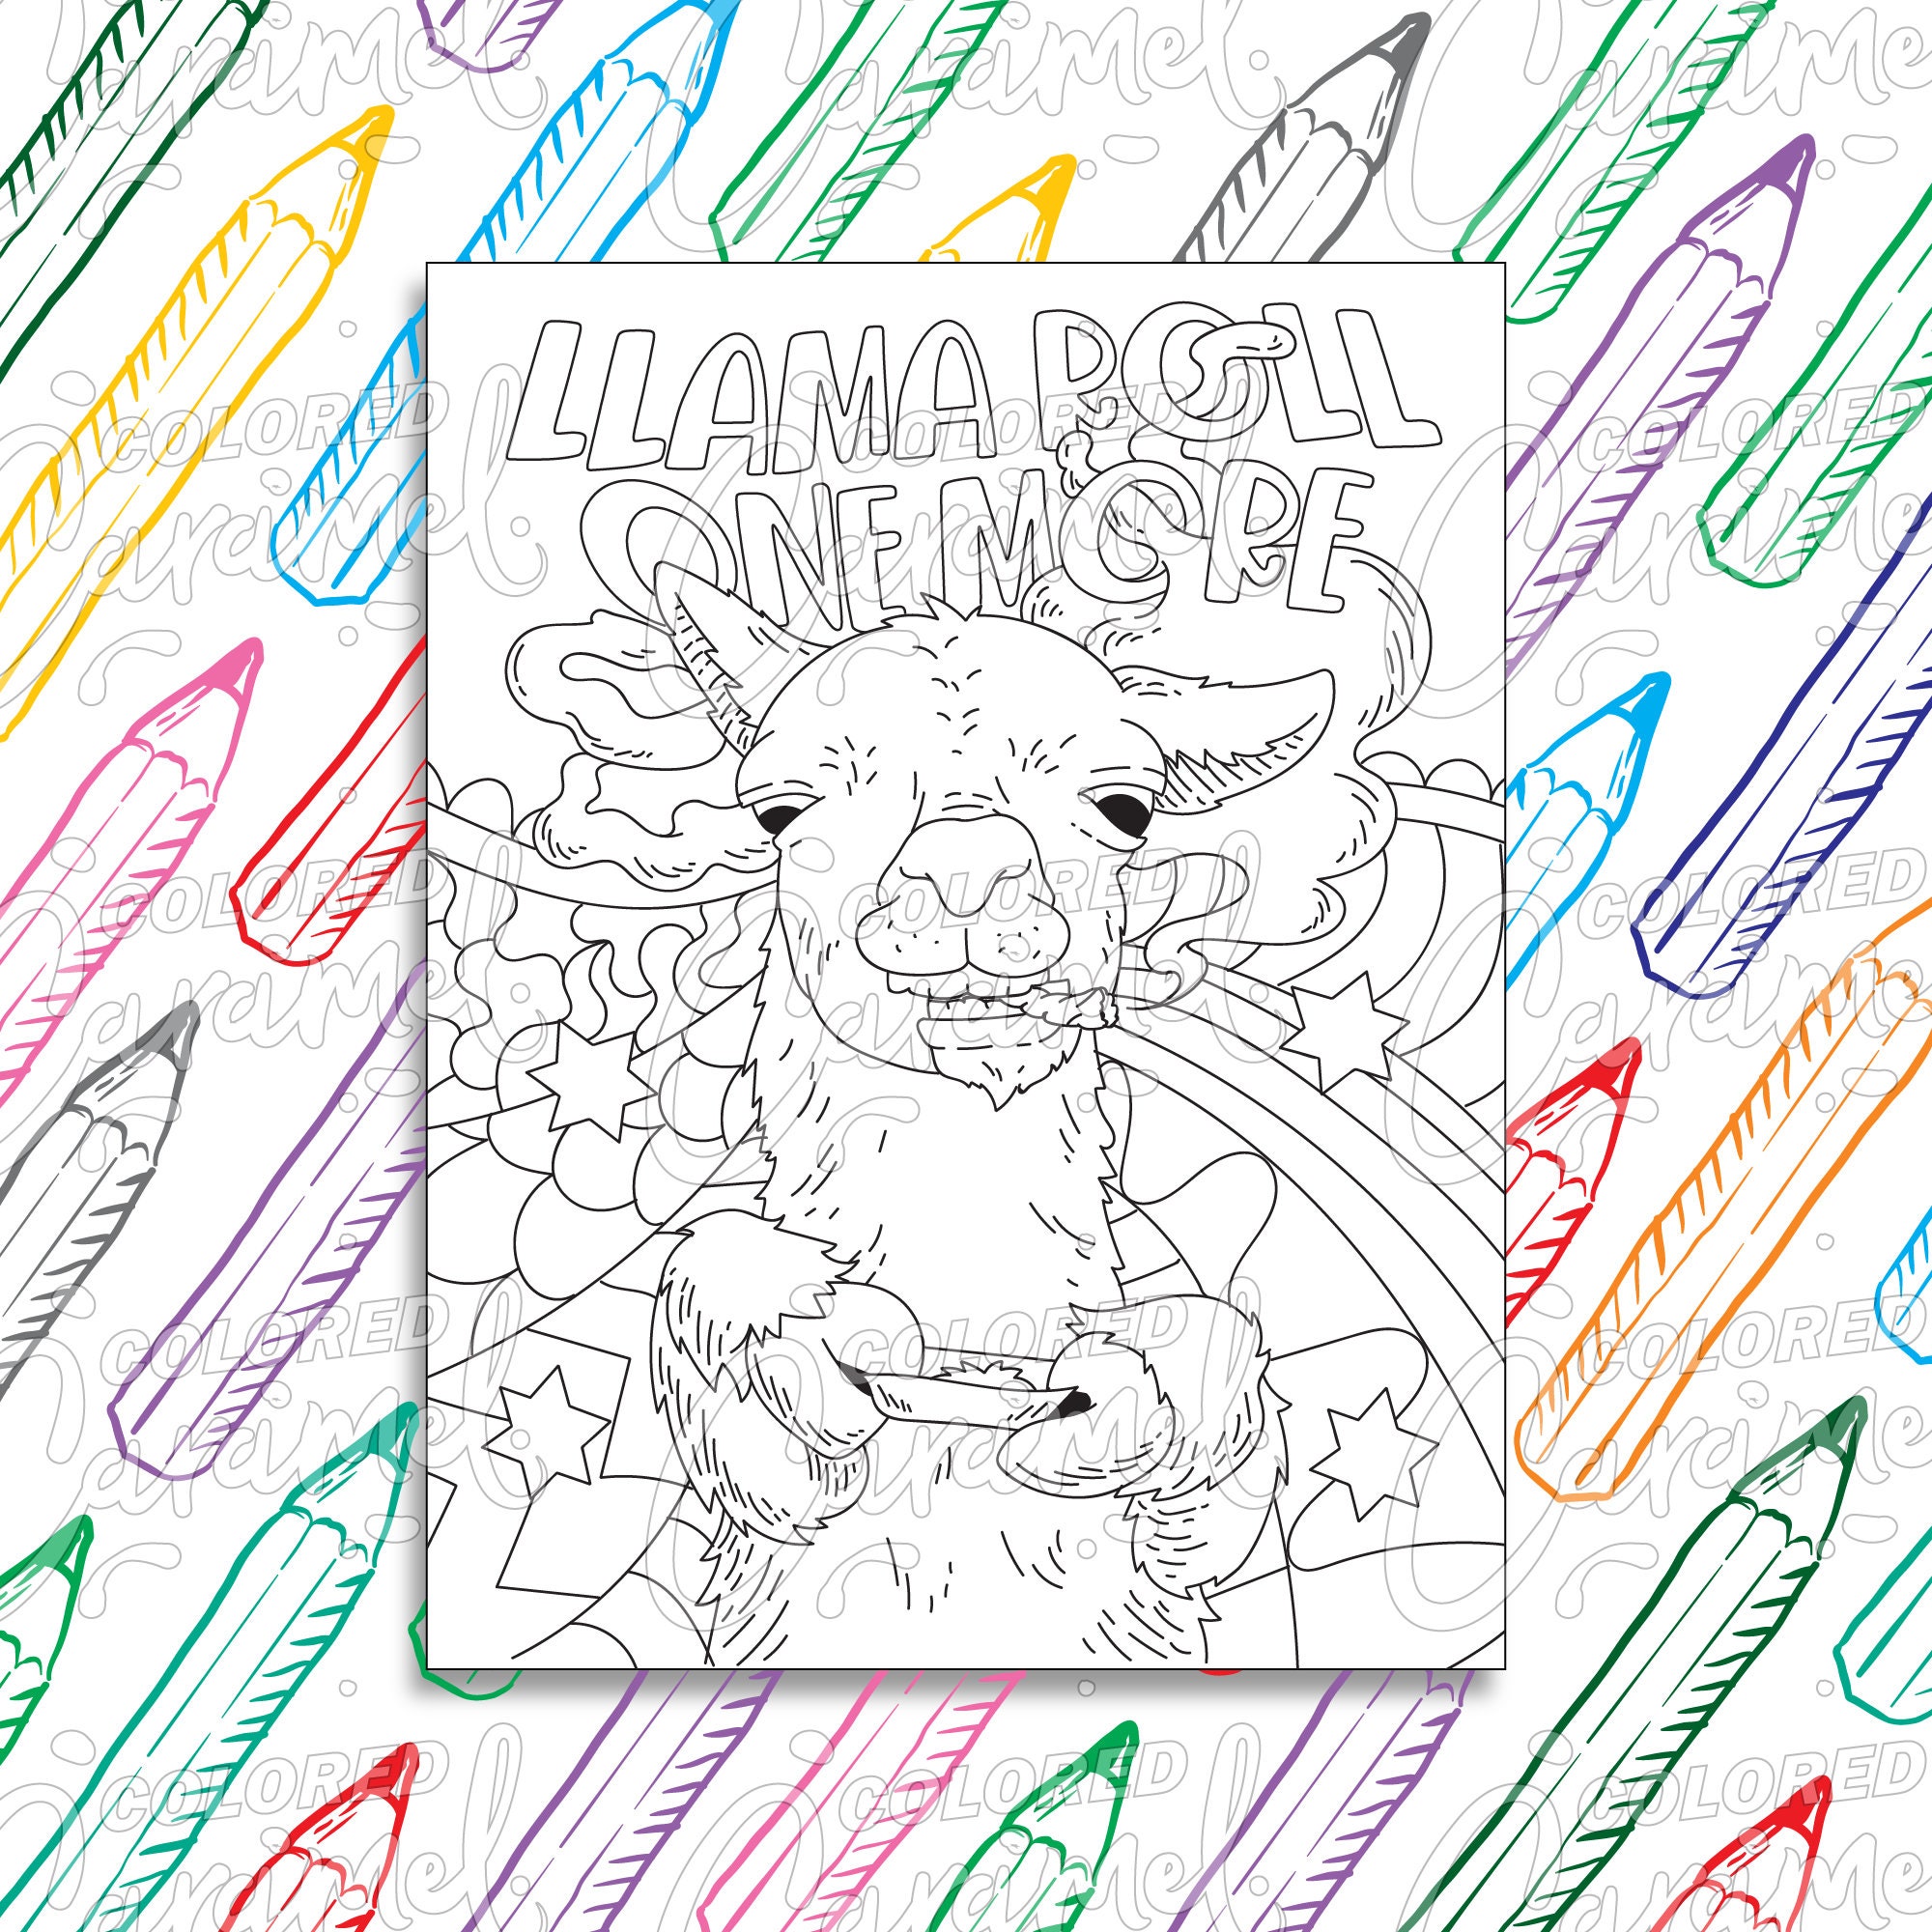 Stoner Coloring Page Digital Download PDF, Trippy, Funny and Cool Llama Smoking Weed, Printable Psychedelic Drawing & Illustration